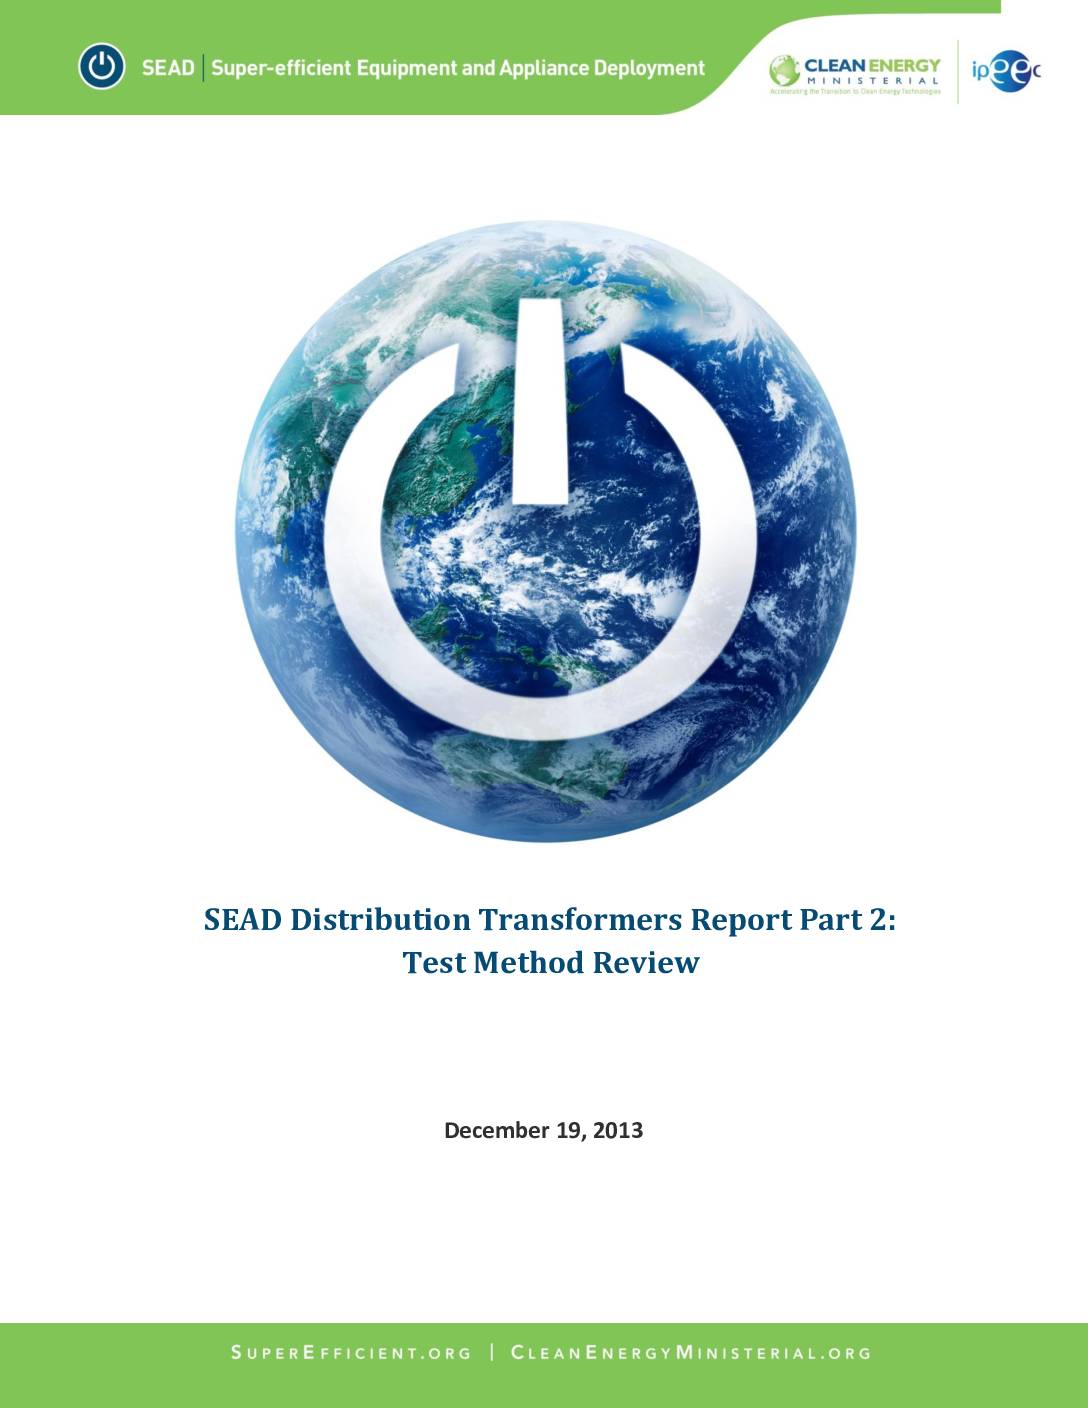 SEAD Distribution Transformers Report Part 2: Test Method Review